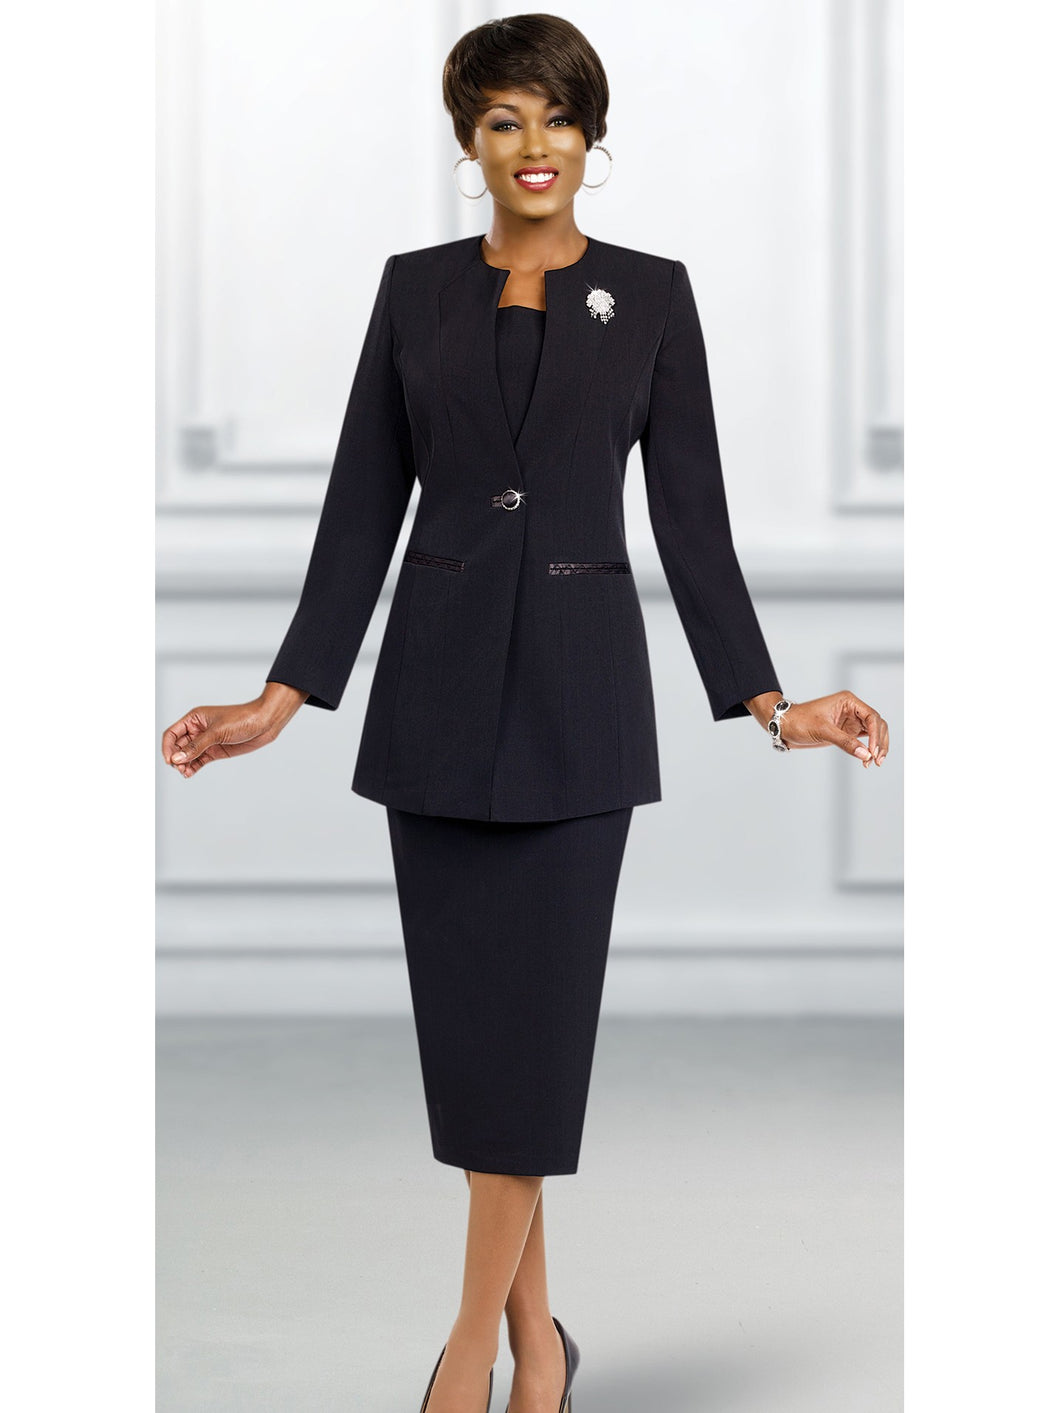 78099-1 (Sizes 22-30) – Not Just Church Suits